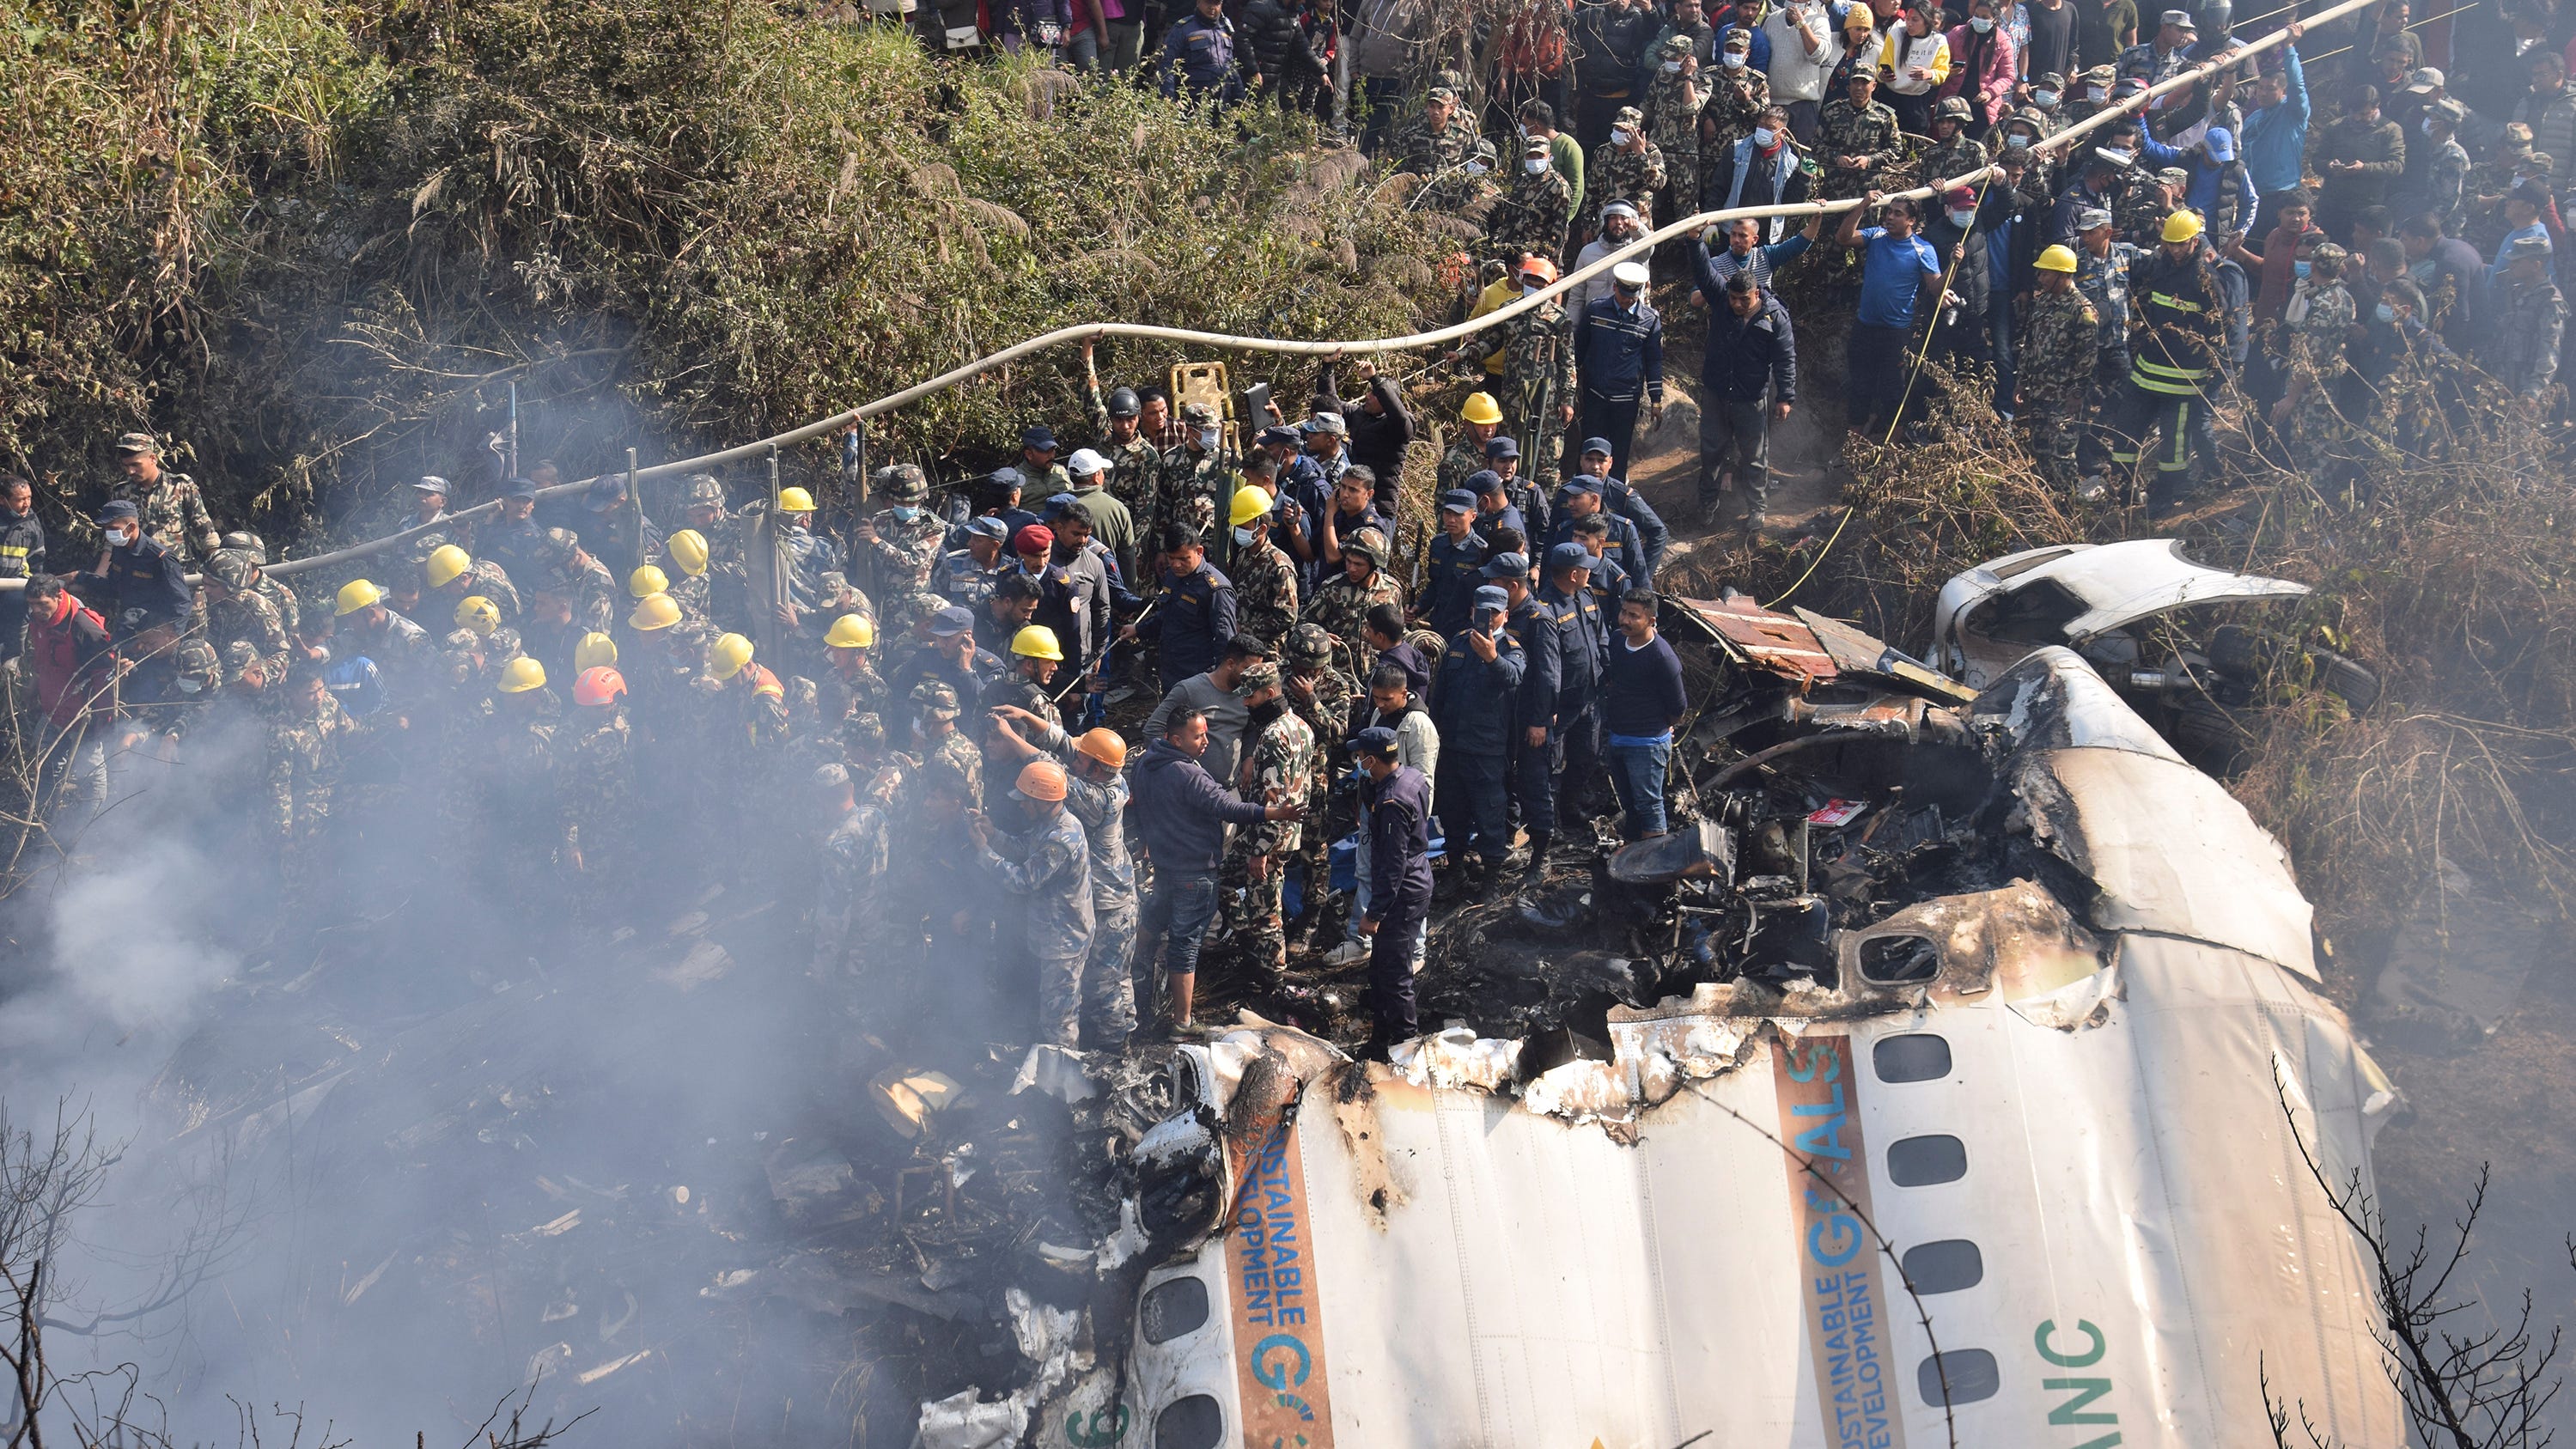 Nepalese rescue workers and civilians gather around the wreckage of a passenger plane that crashed in Pokhara, Nepal, Sunday, Jan. 15, 2023. 